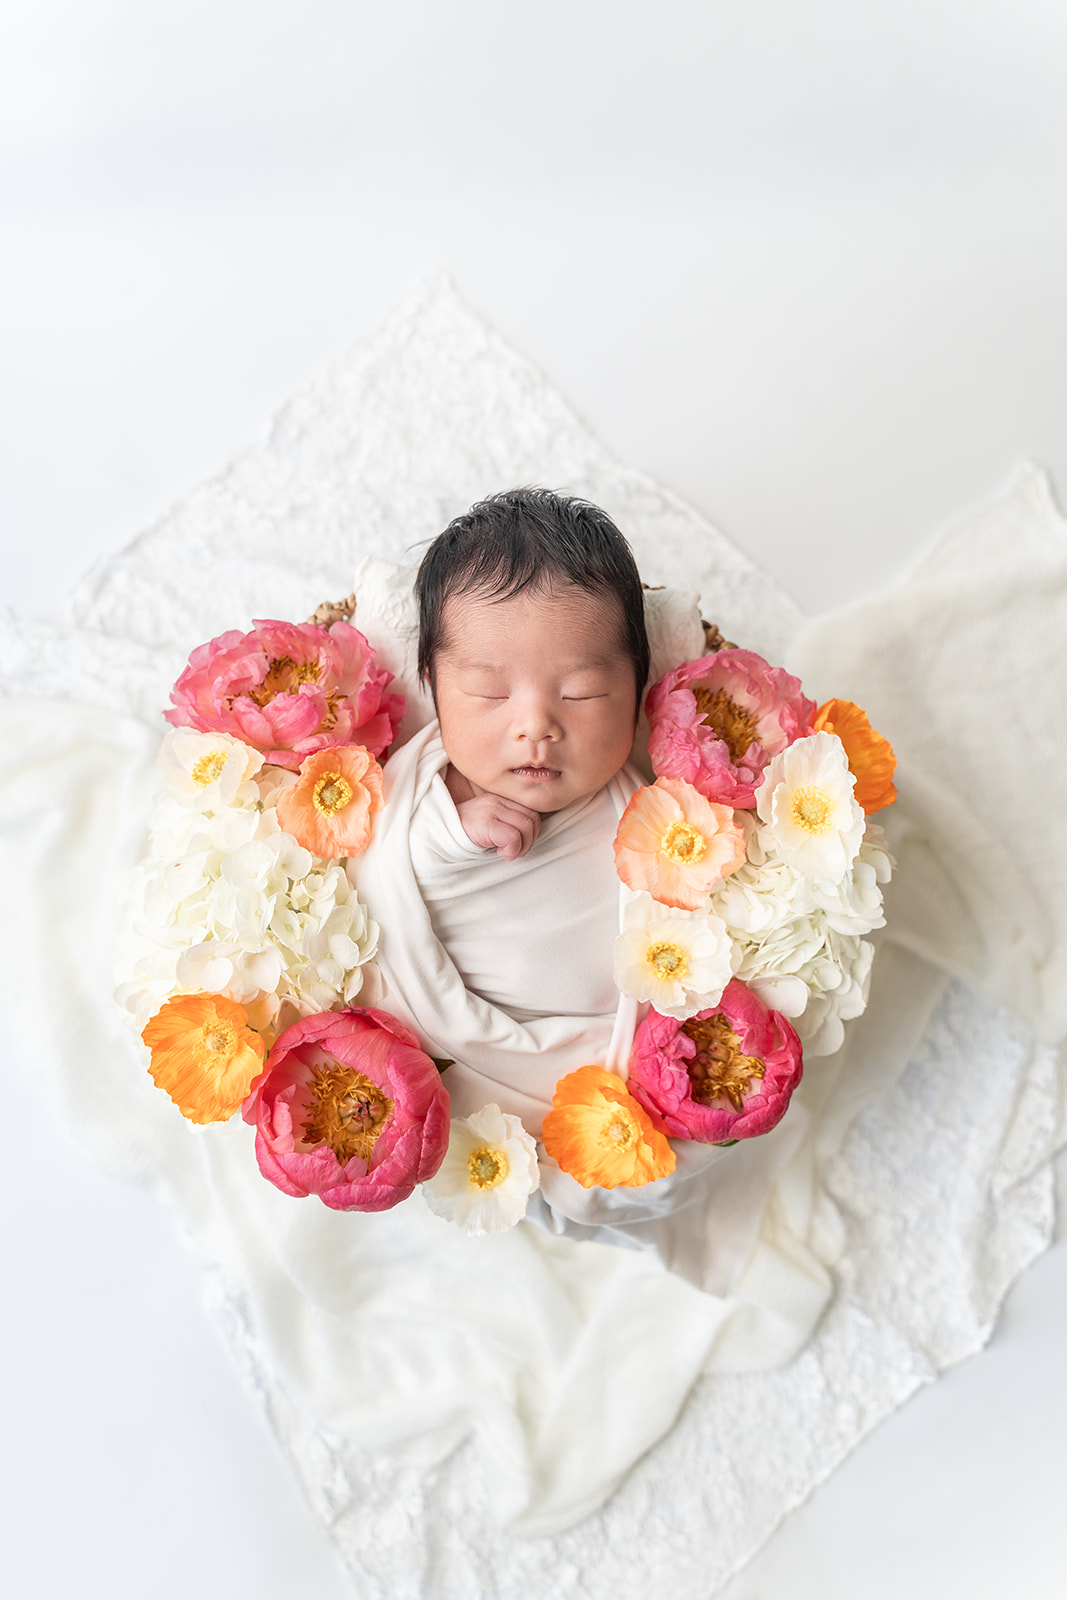 A newborn baby sleeps in a basket filled with colorful pink flowers in a studio